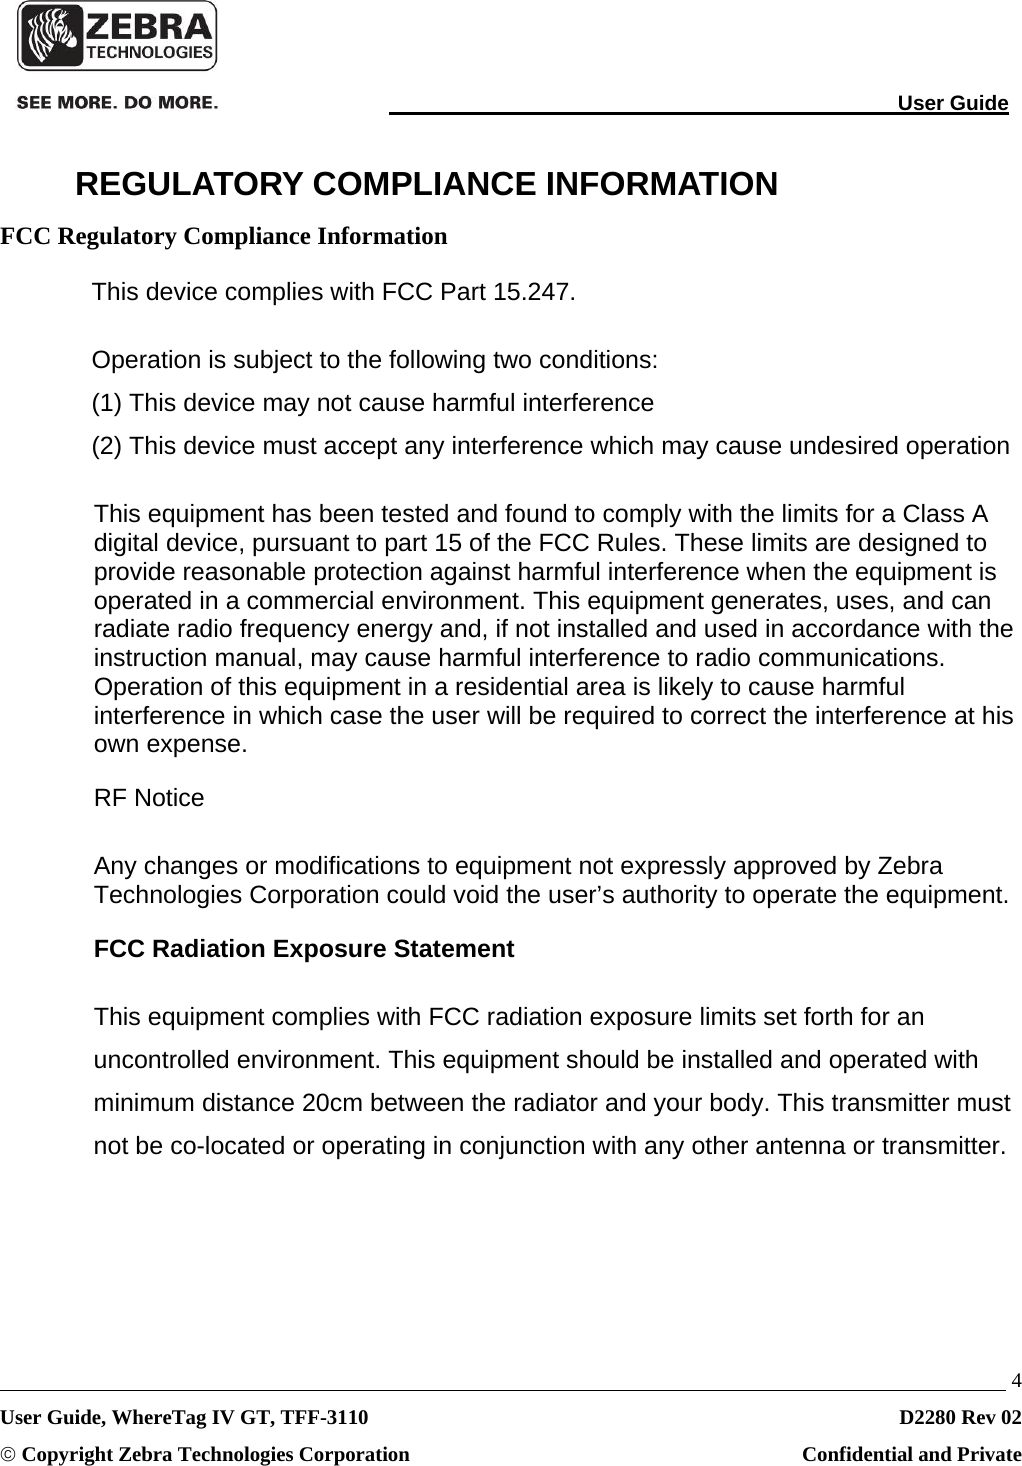                                                                                                                                User Guide   4 User Guide, WhereTag IV GT, TFF-3110  D2280 Rev 02 © Copyright Zebra Technologies Corporation  Confidential and Private REGULATORY COMPLIANCE INFORMATION FCC Regulatory Compliance Information This device complies with FCC Part 15.247.  Operation is subject to the following two conditions:  (1) This device may not cause harmful interference (2) This device must accept any interference which may cause undesired operation This equipment has been tested and found to comply with the limits for a Class A digital device, pursuant to part 15 of the FCC Rules. These limits are designed to provide reasonable protection against harmful interference when the equipment is operated in a commercial environment. This equipment generates, uses, and can radiate radio frequency energy and, if not installed and used in accordance with the instruction manual, may cause harmful interference to radio communications. Operation of this equipment in a residential area is likely to cause harmful interference in which case the user will be required to correct the interference at his own expense. RF Notice Any changes or modifications to equipment not expressly approved by Zebra Technologies Corporation could void the user’s authority to operate the equipment.  FCC Radiation Exposure Statement This equipment complies with FCC radiation exposure limits set forth for an uncontrolled environment. This equipment should be installed and operated with minimum distance 20cm between the radiator and your body. This transmitter must not be co-located or operating in conjunction with any other antenna or transmitter. 